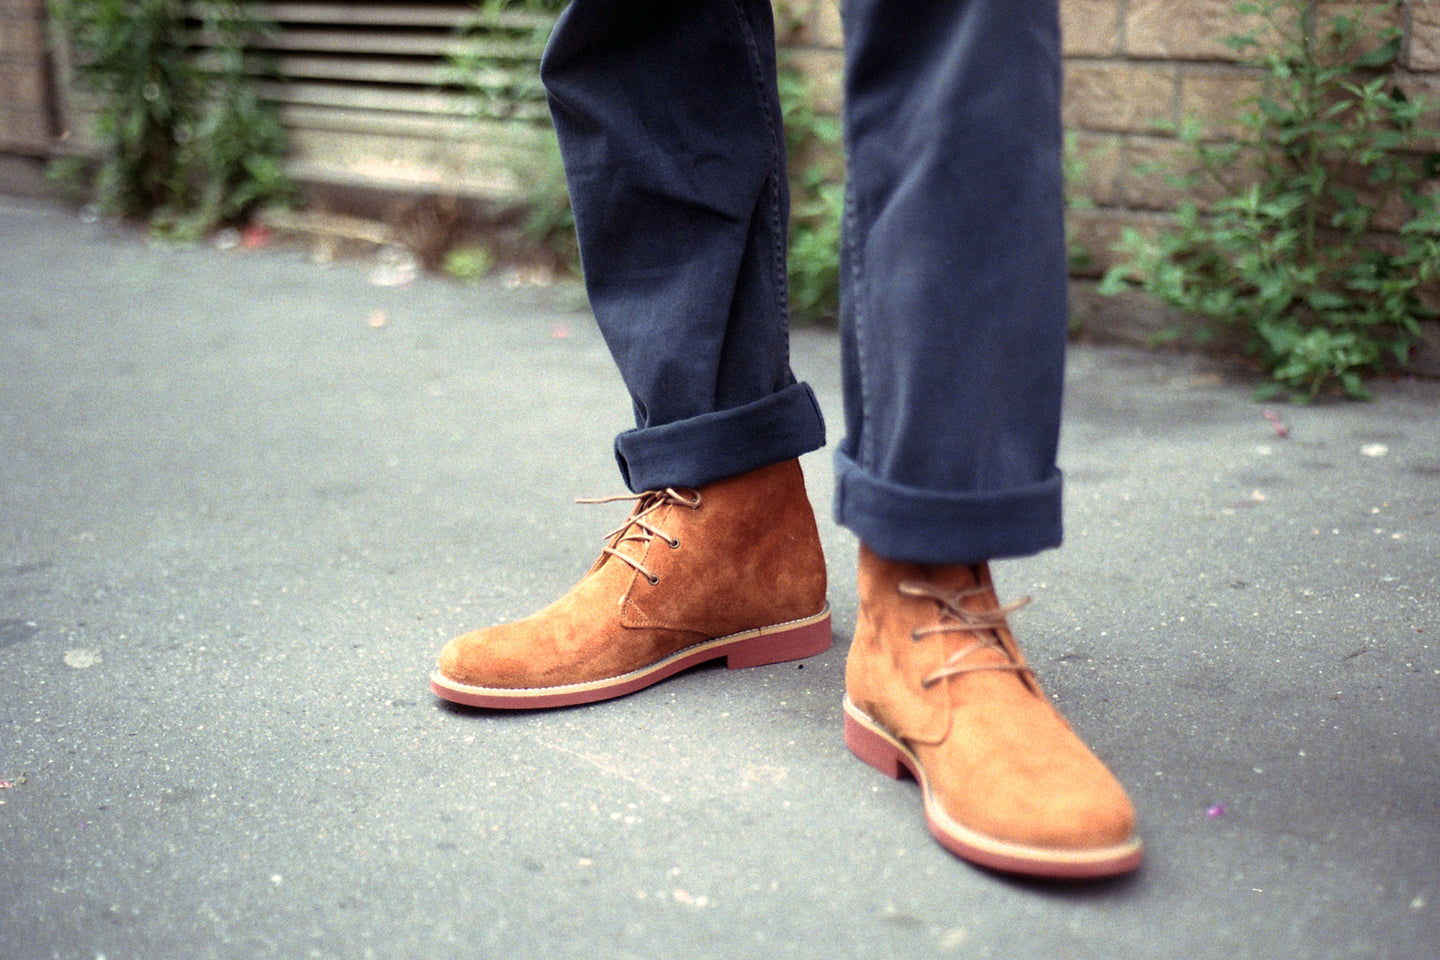 Derby shoes and desert boots